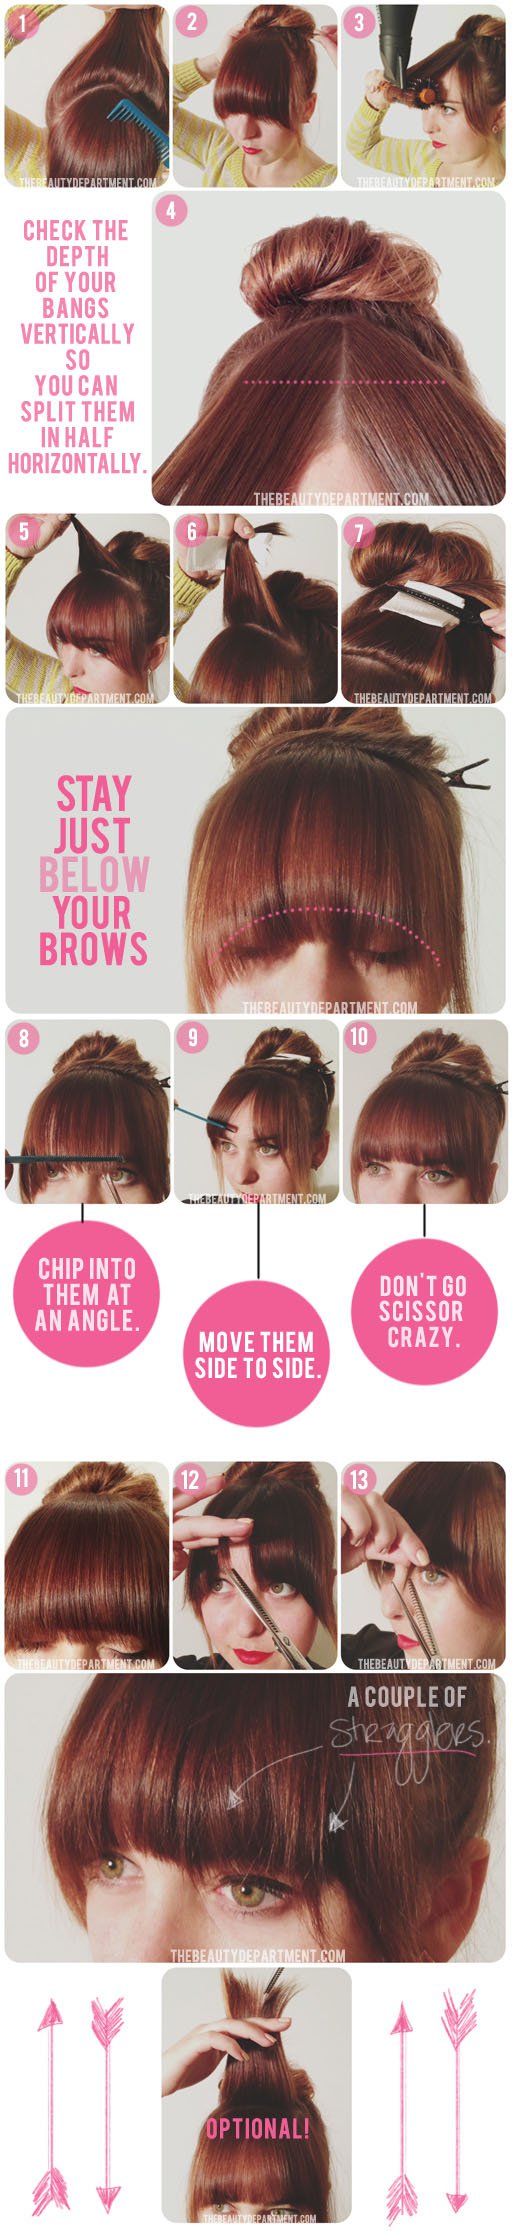 13 Easy and Surprisingly Useful Hairstyle Tips That Will Keep Your Hair Shiny